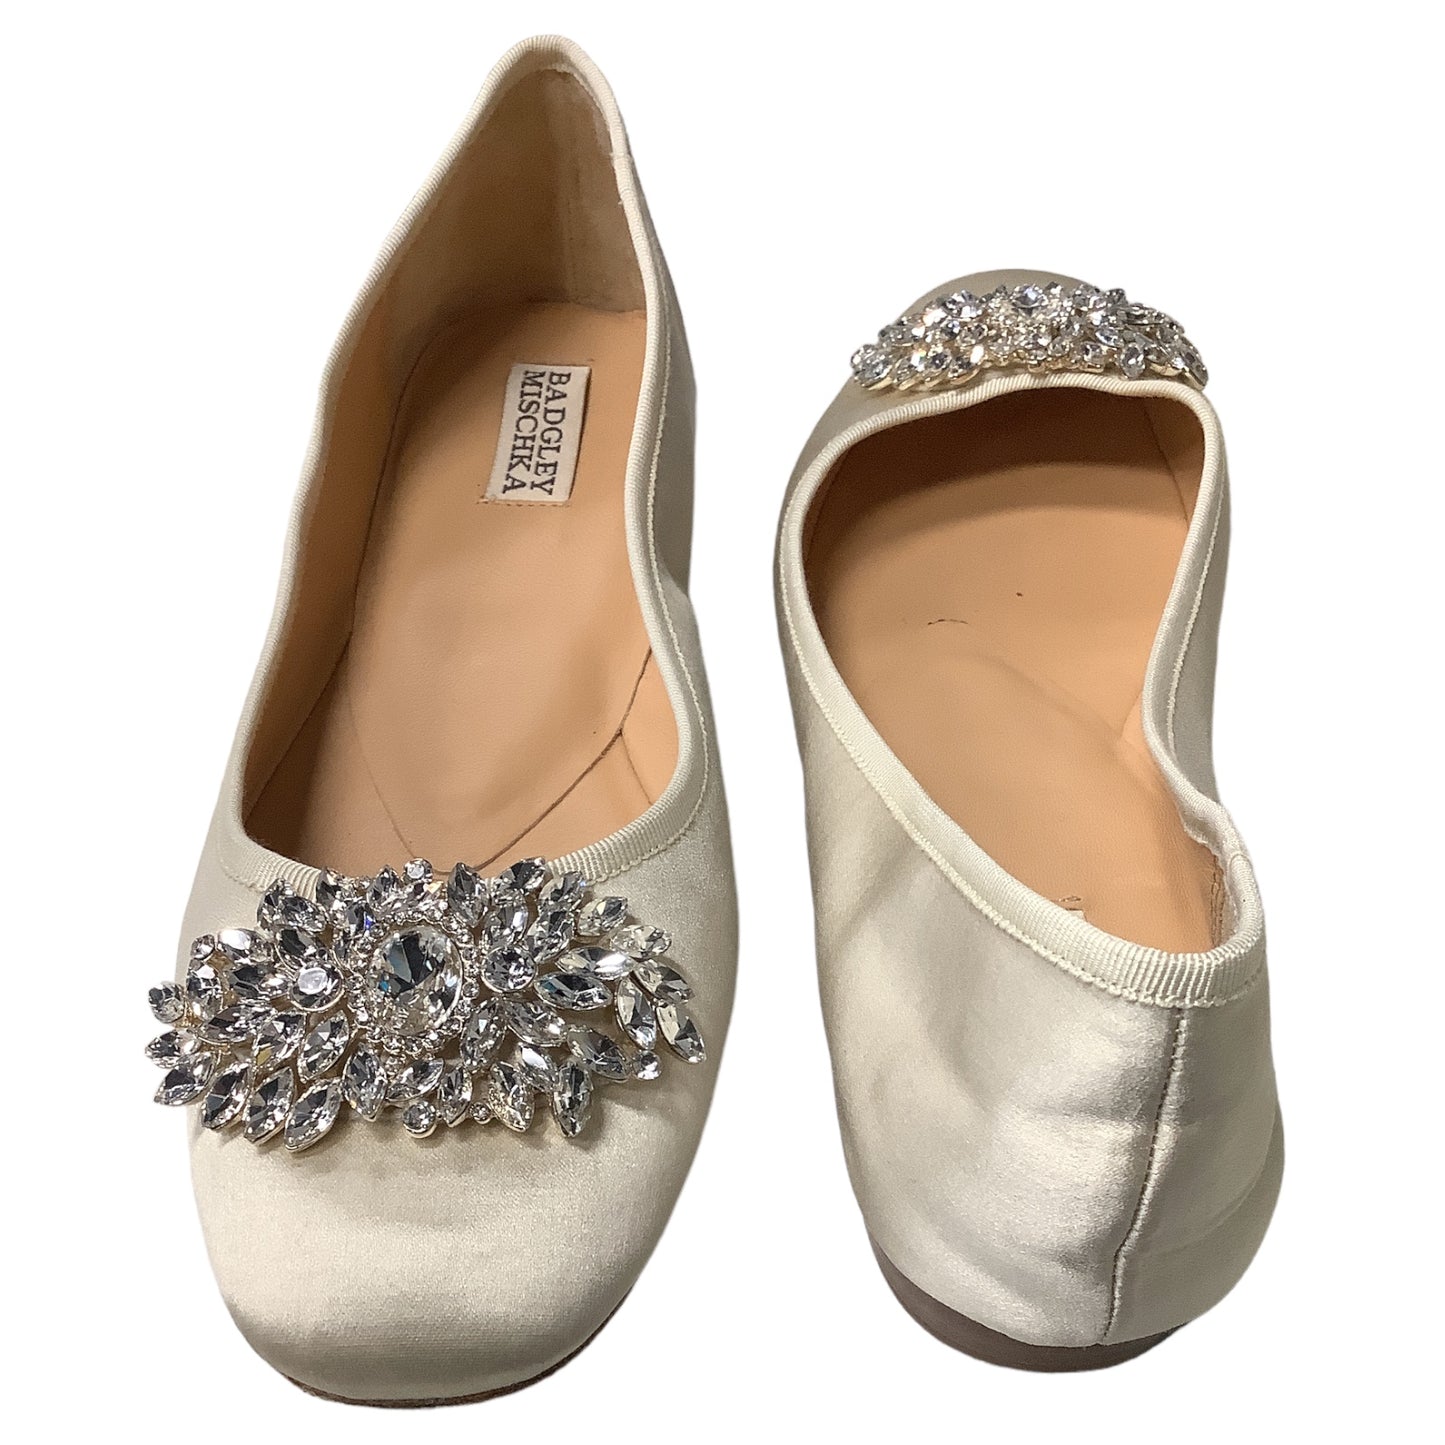 Shoes Flats By Badgley Mischka  Size: 8.5